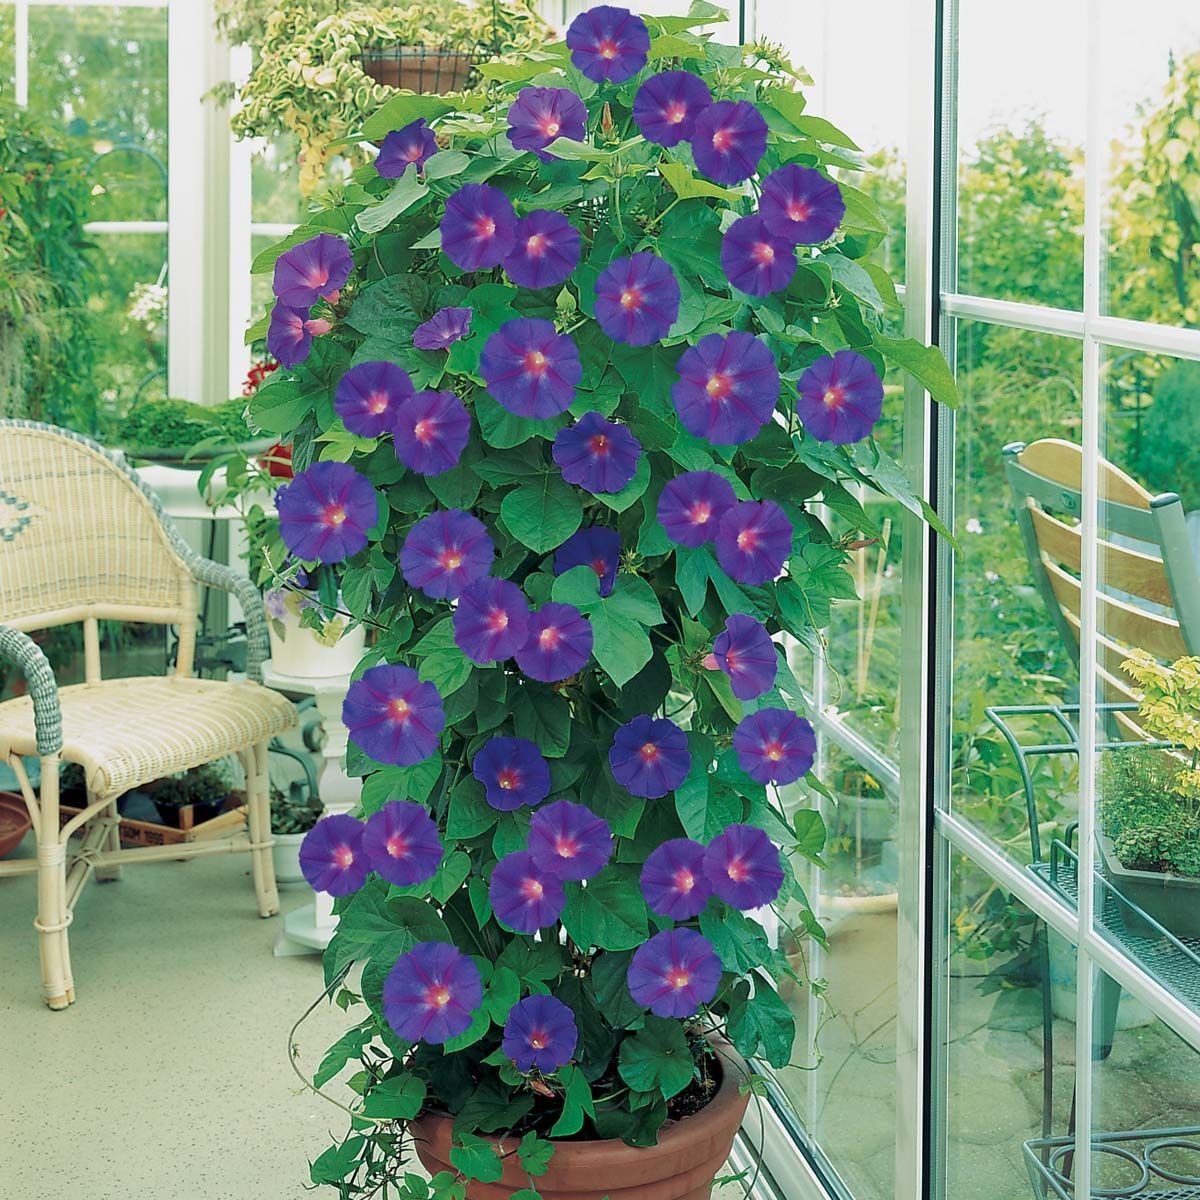 Morning Glory-never thought about growing this one in a pot